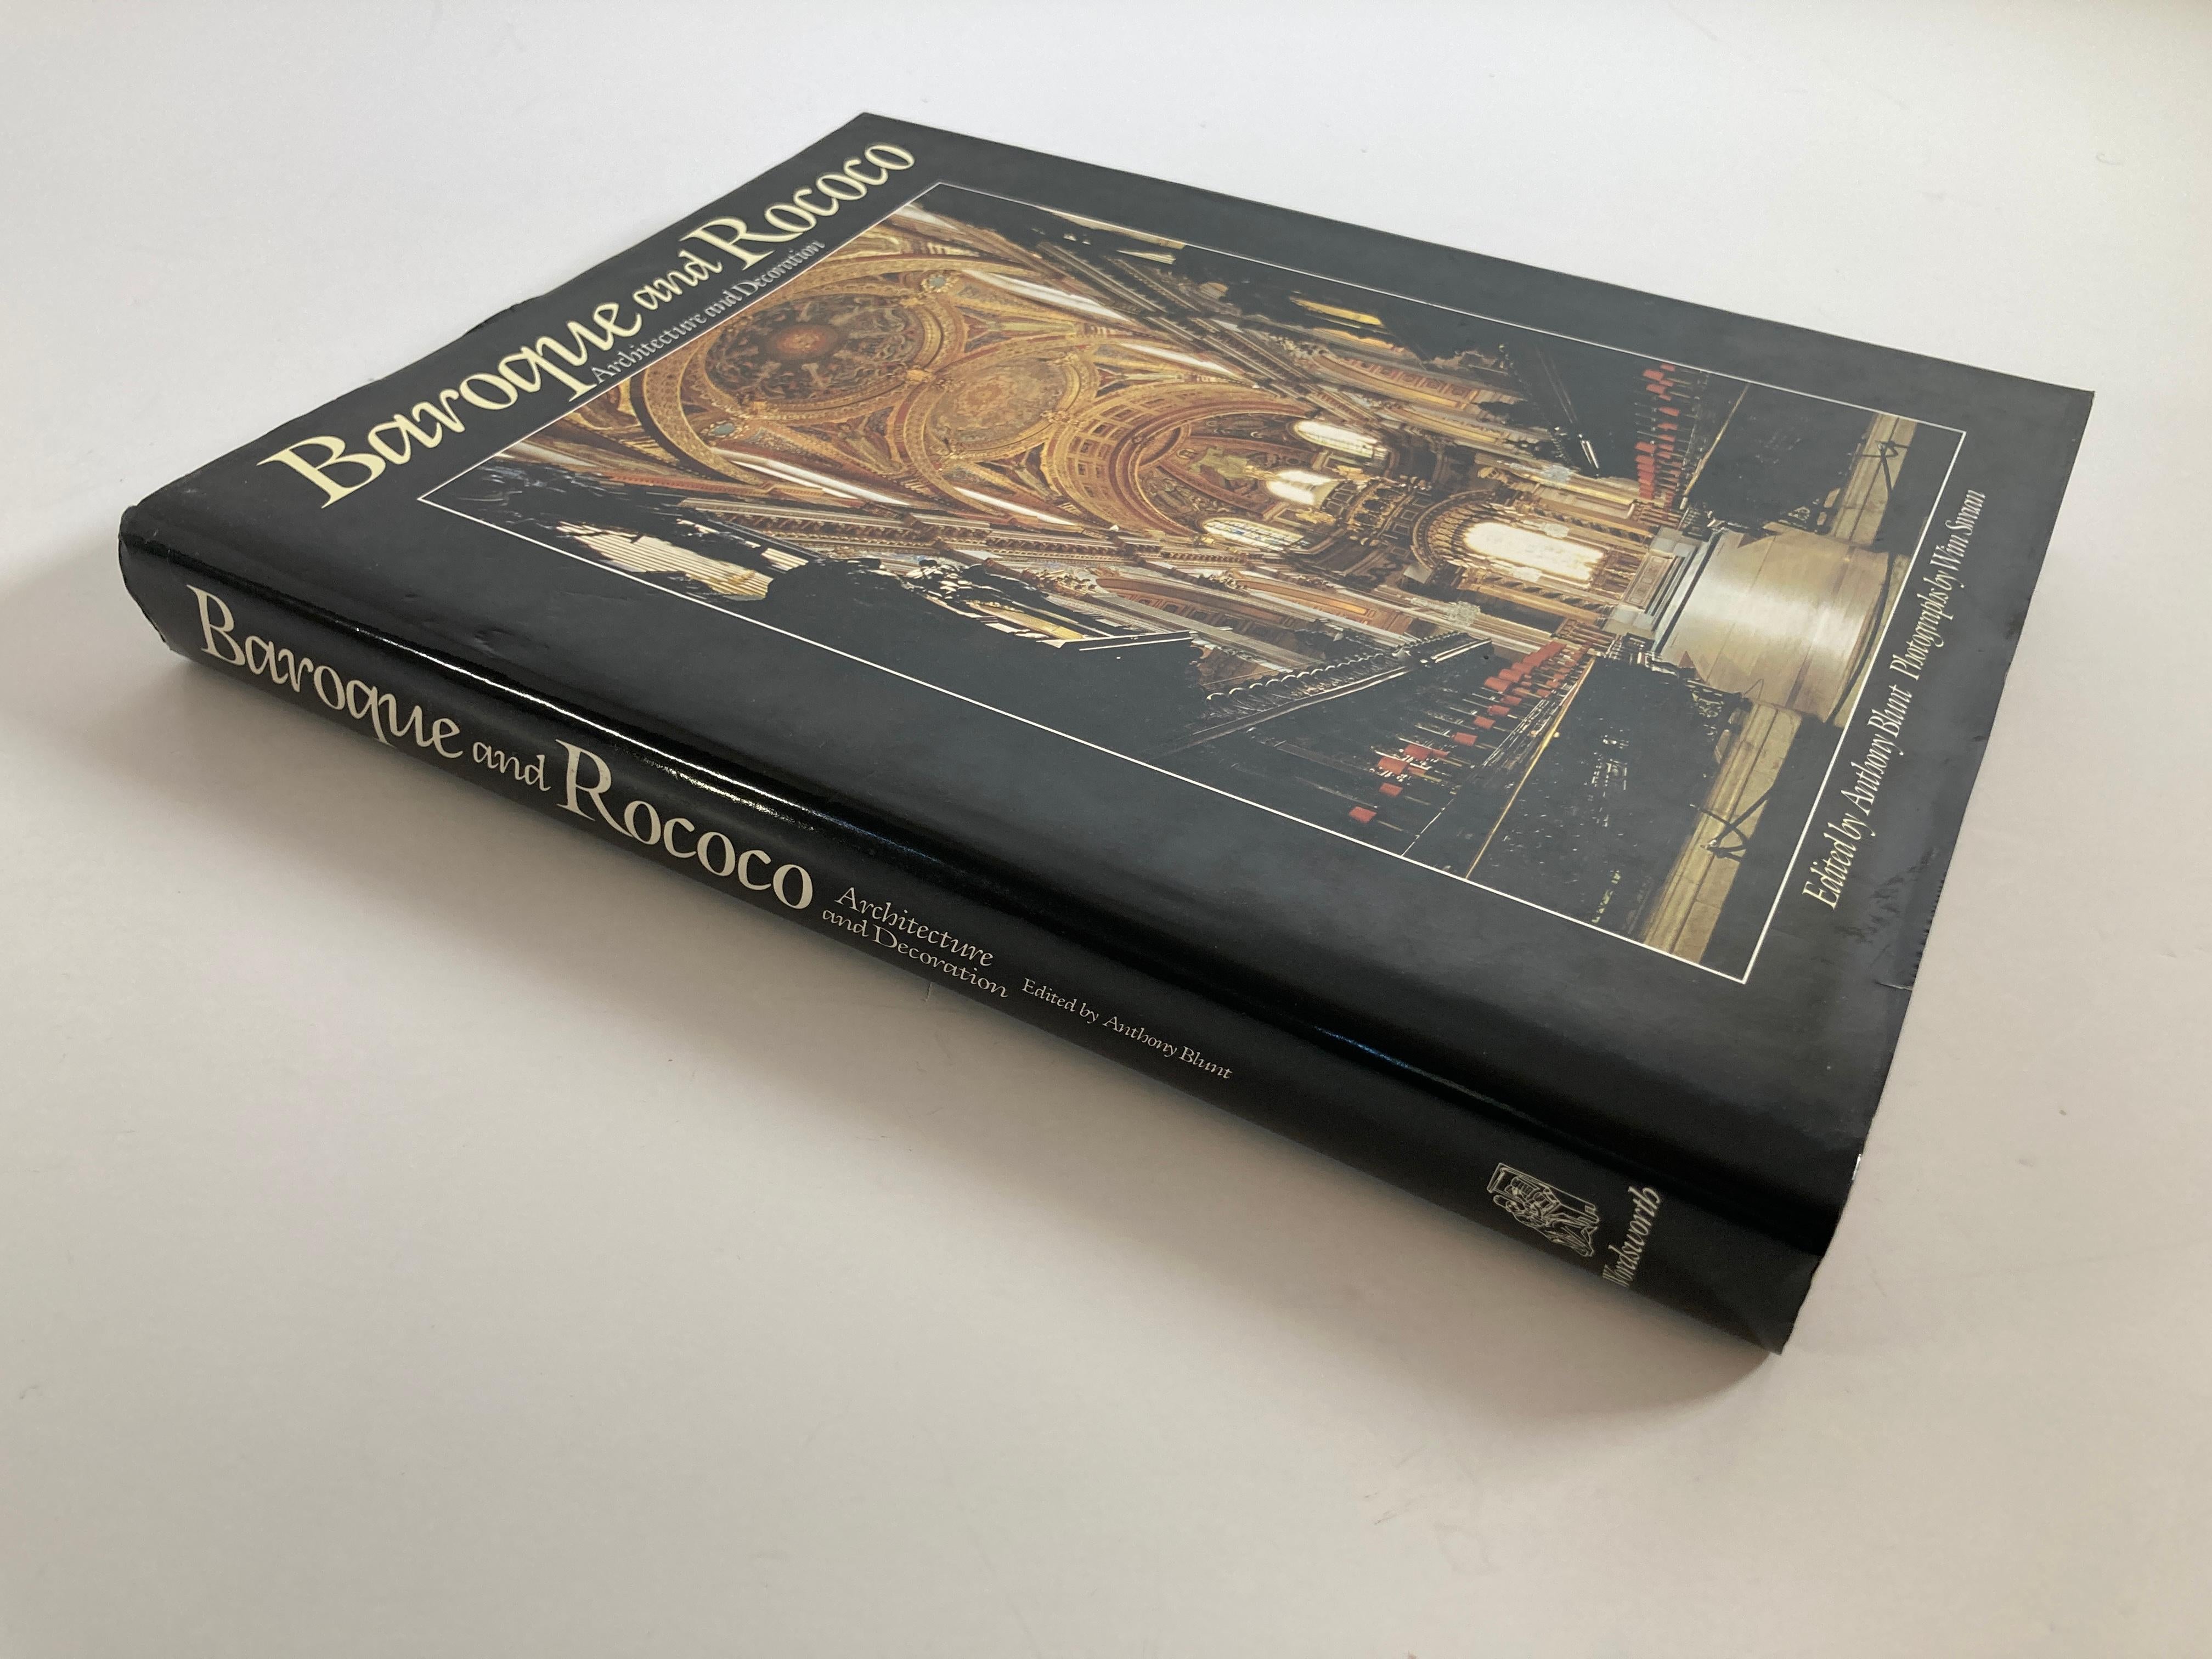 Baroque and Rococo Architecture and Decoration
Book by Alastair Laing, Anthony Blunt, and Christopher Ernest Tadgell.
A study of a period in art and design ranges from Baroque architecture in Rome in the early 1600s through Bernini, Boromini, and